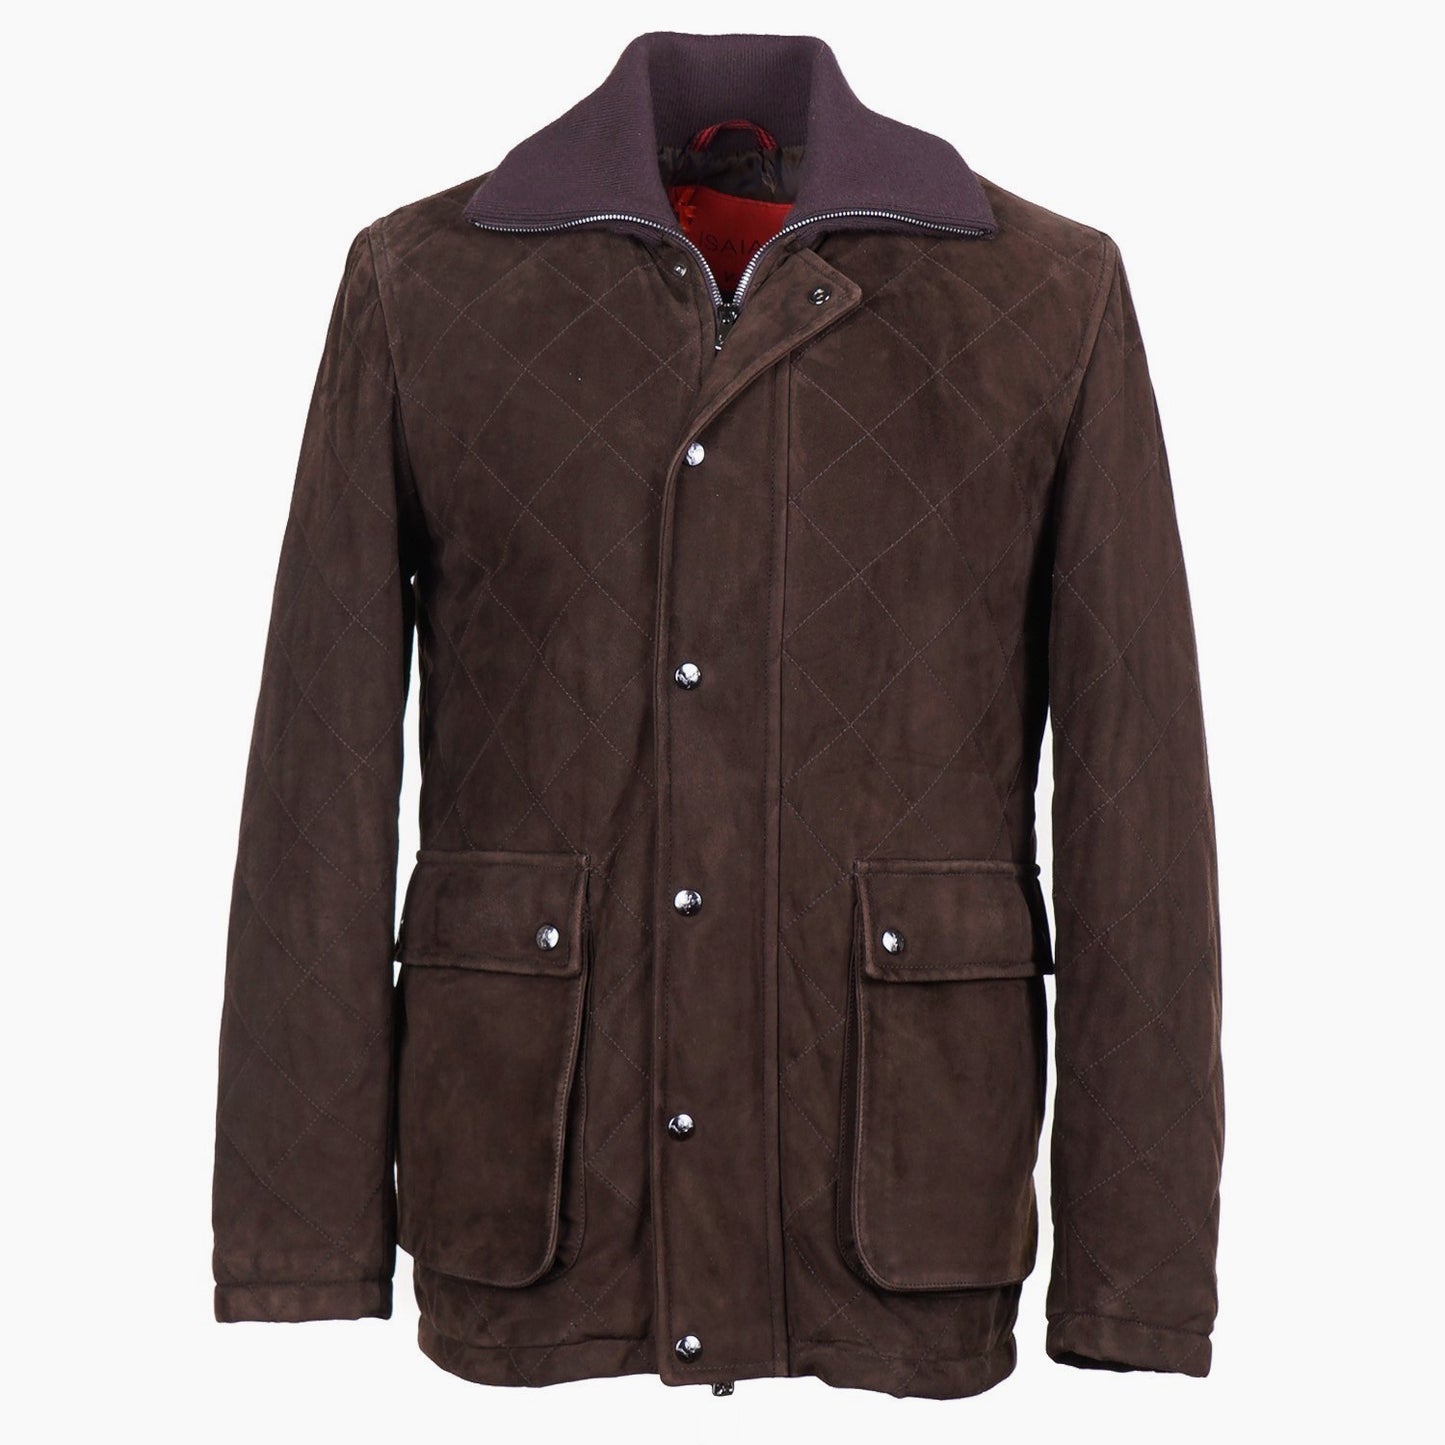 Isaia Quilted Suede Hunting Jacket - Top Shelf Apparel